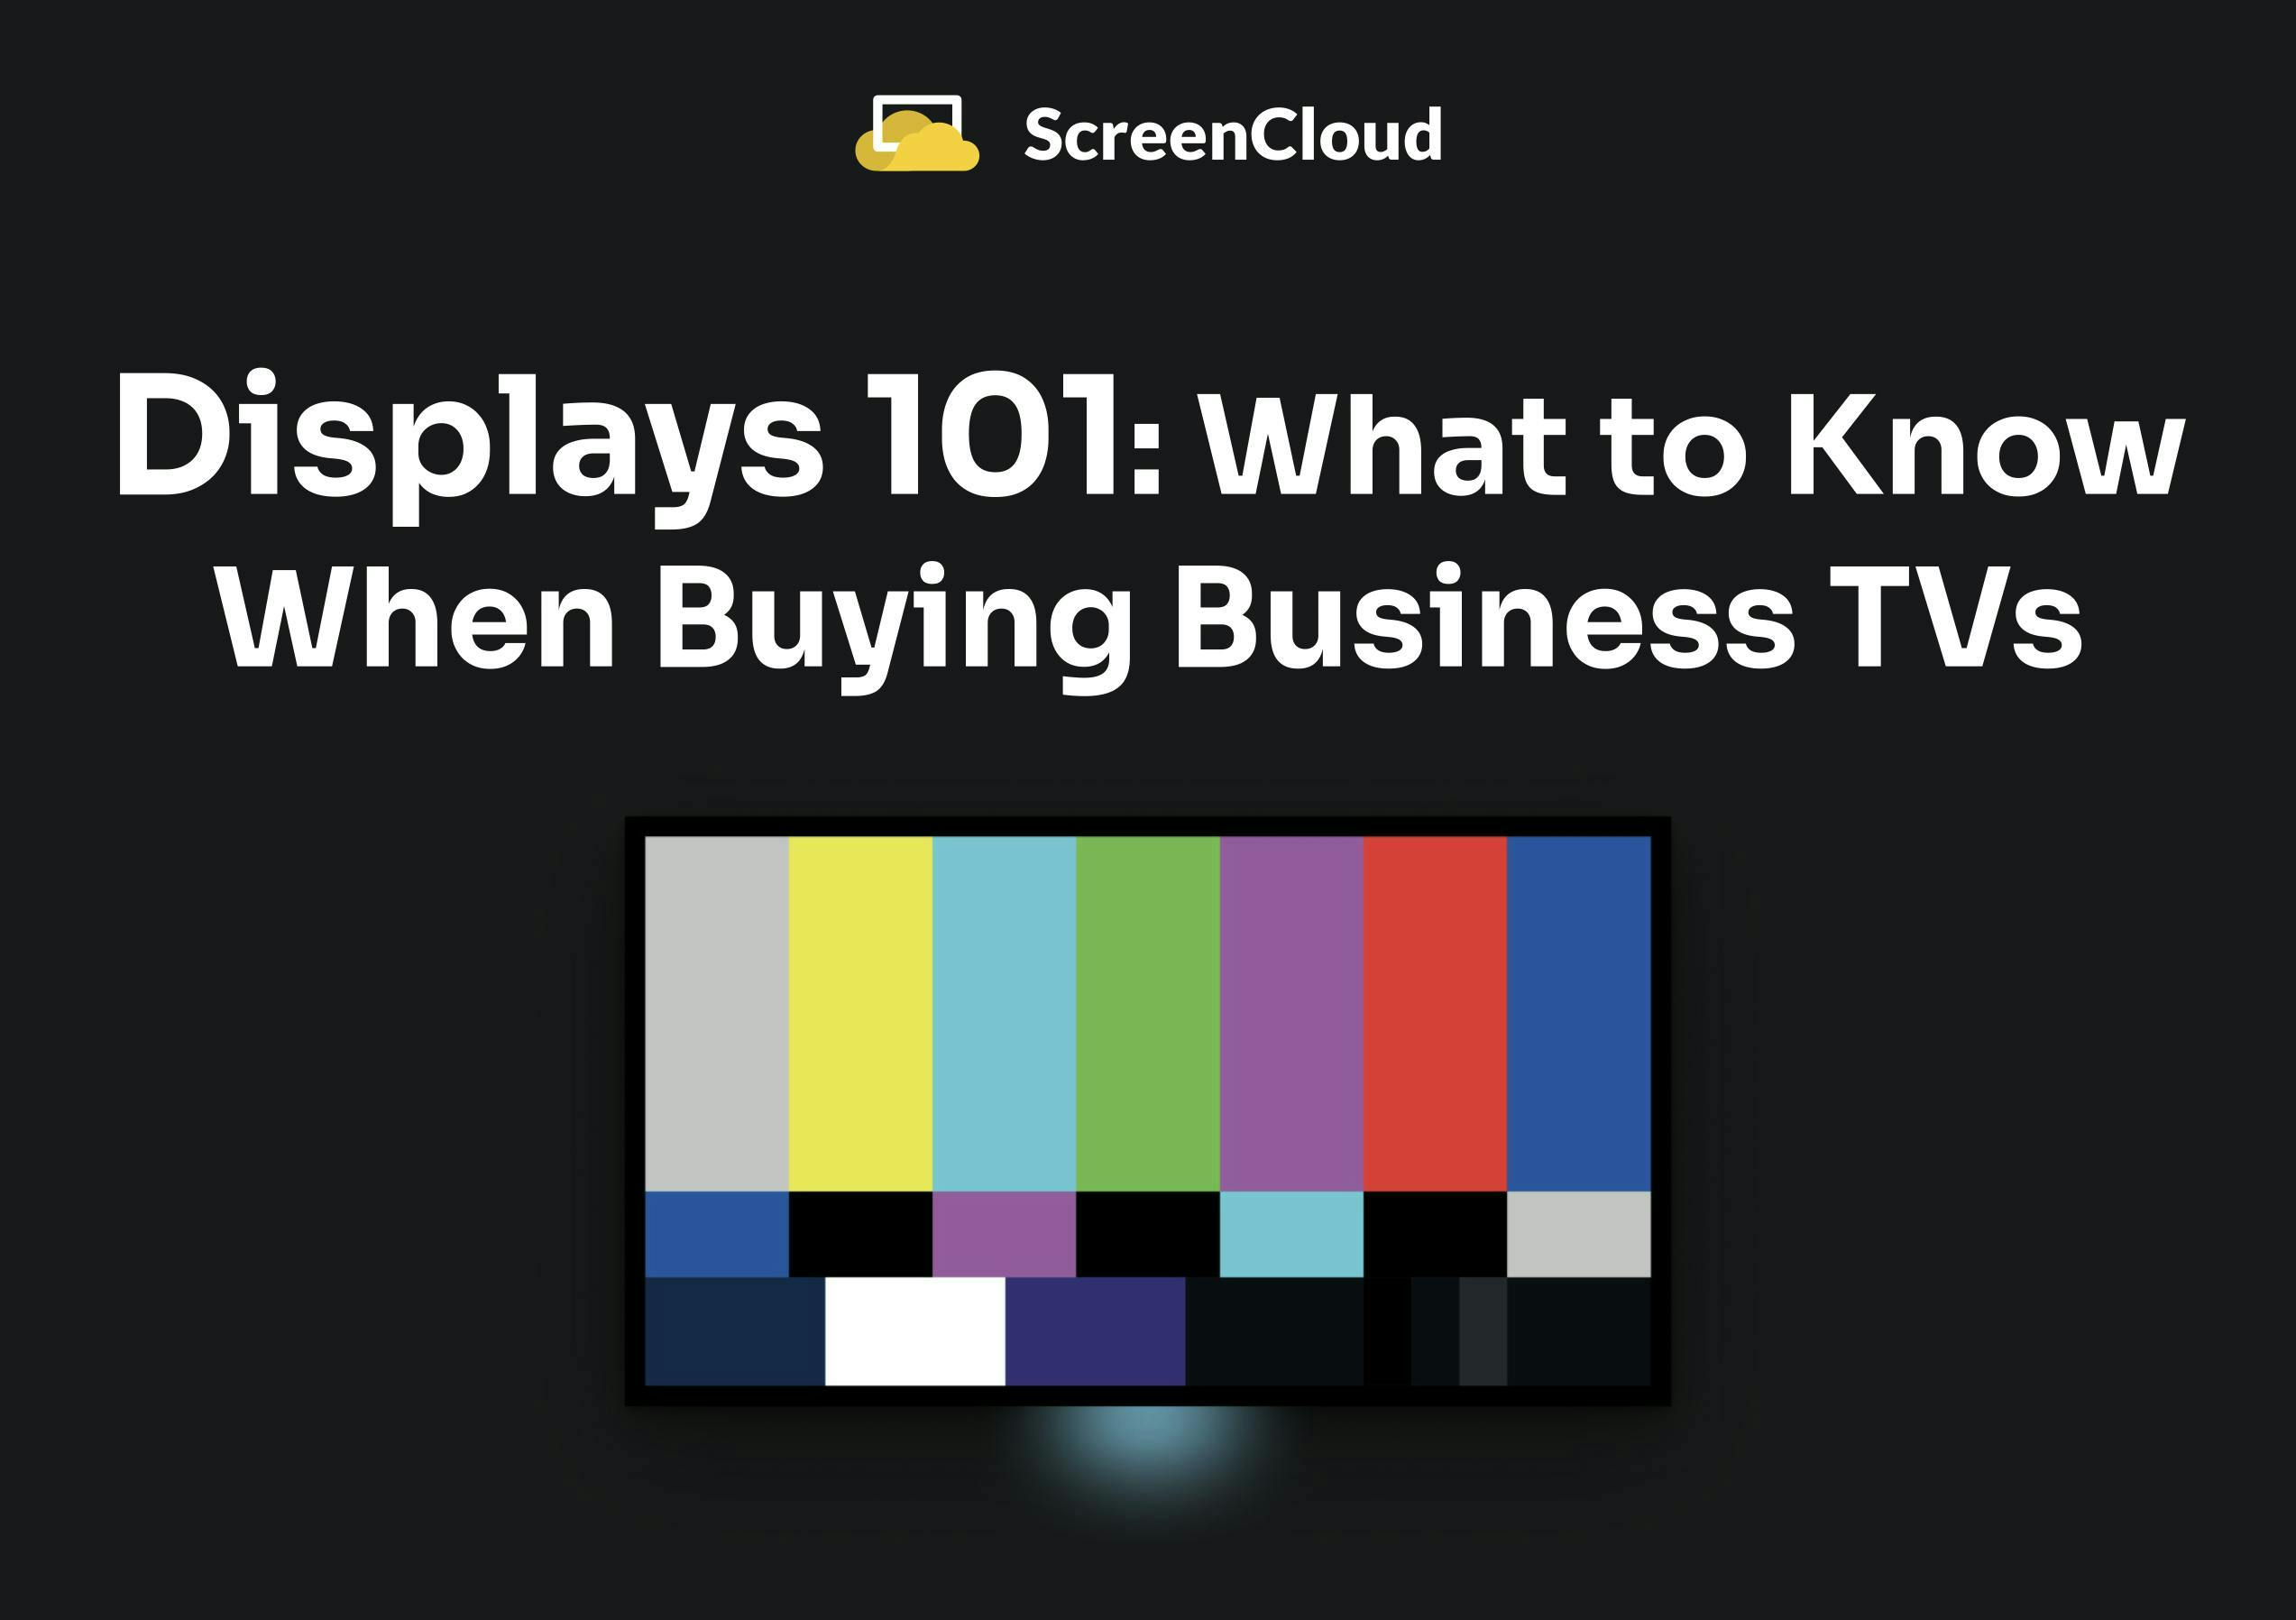 ScreenCloud Article - Displays 101: What to Know When Buying Business TVs